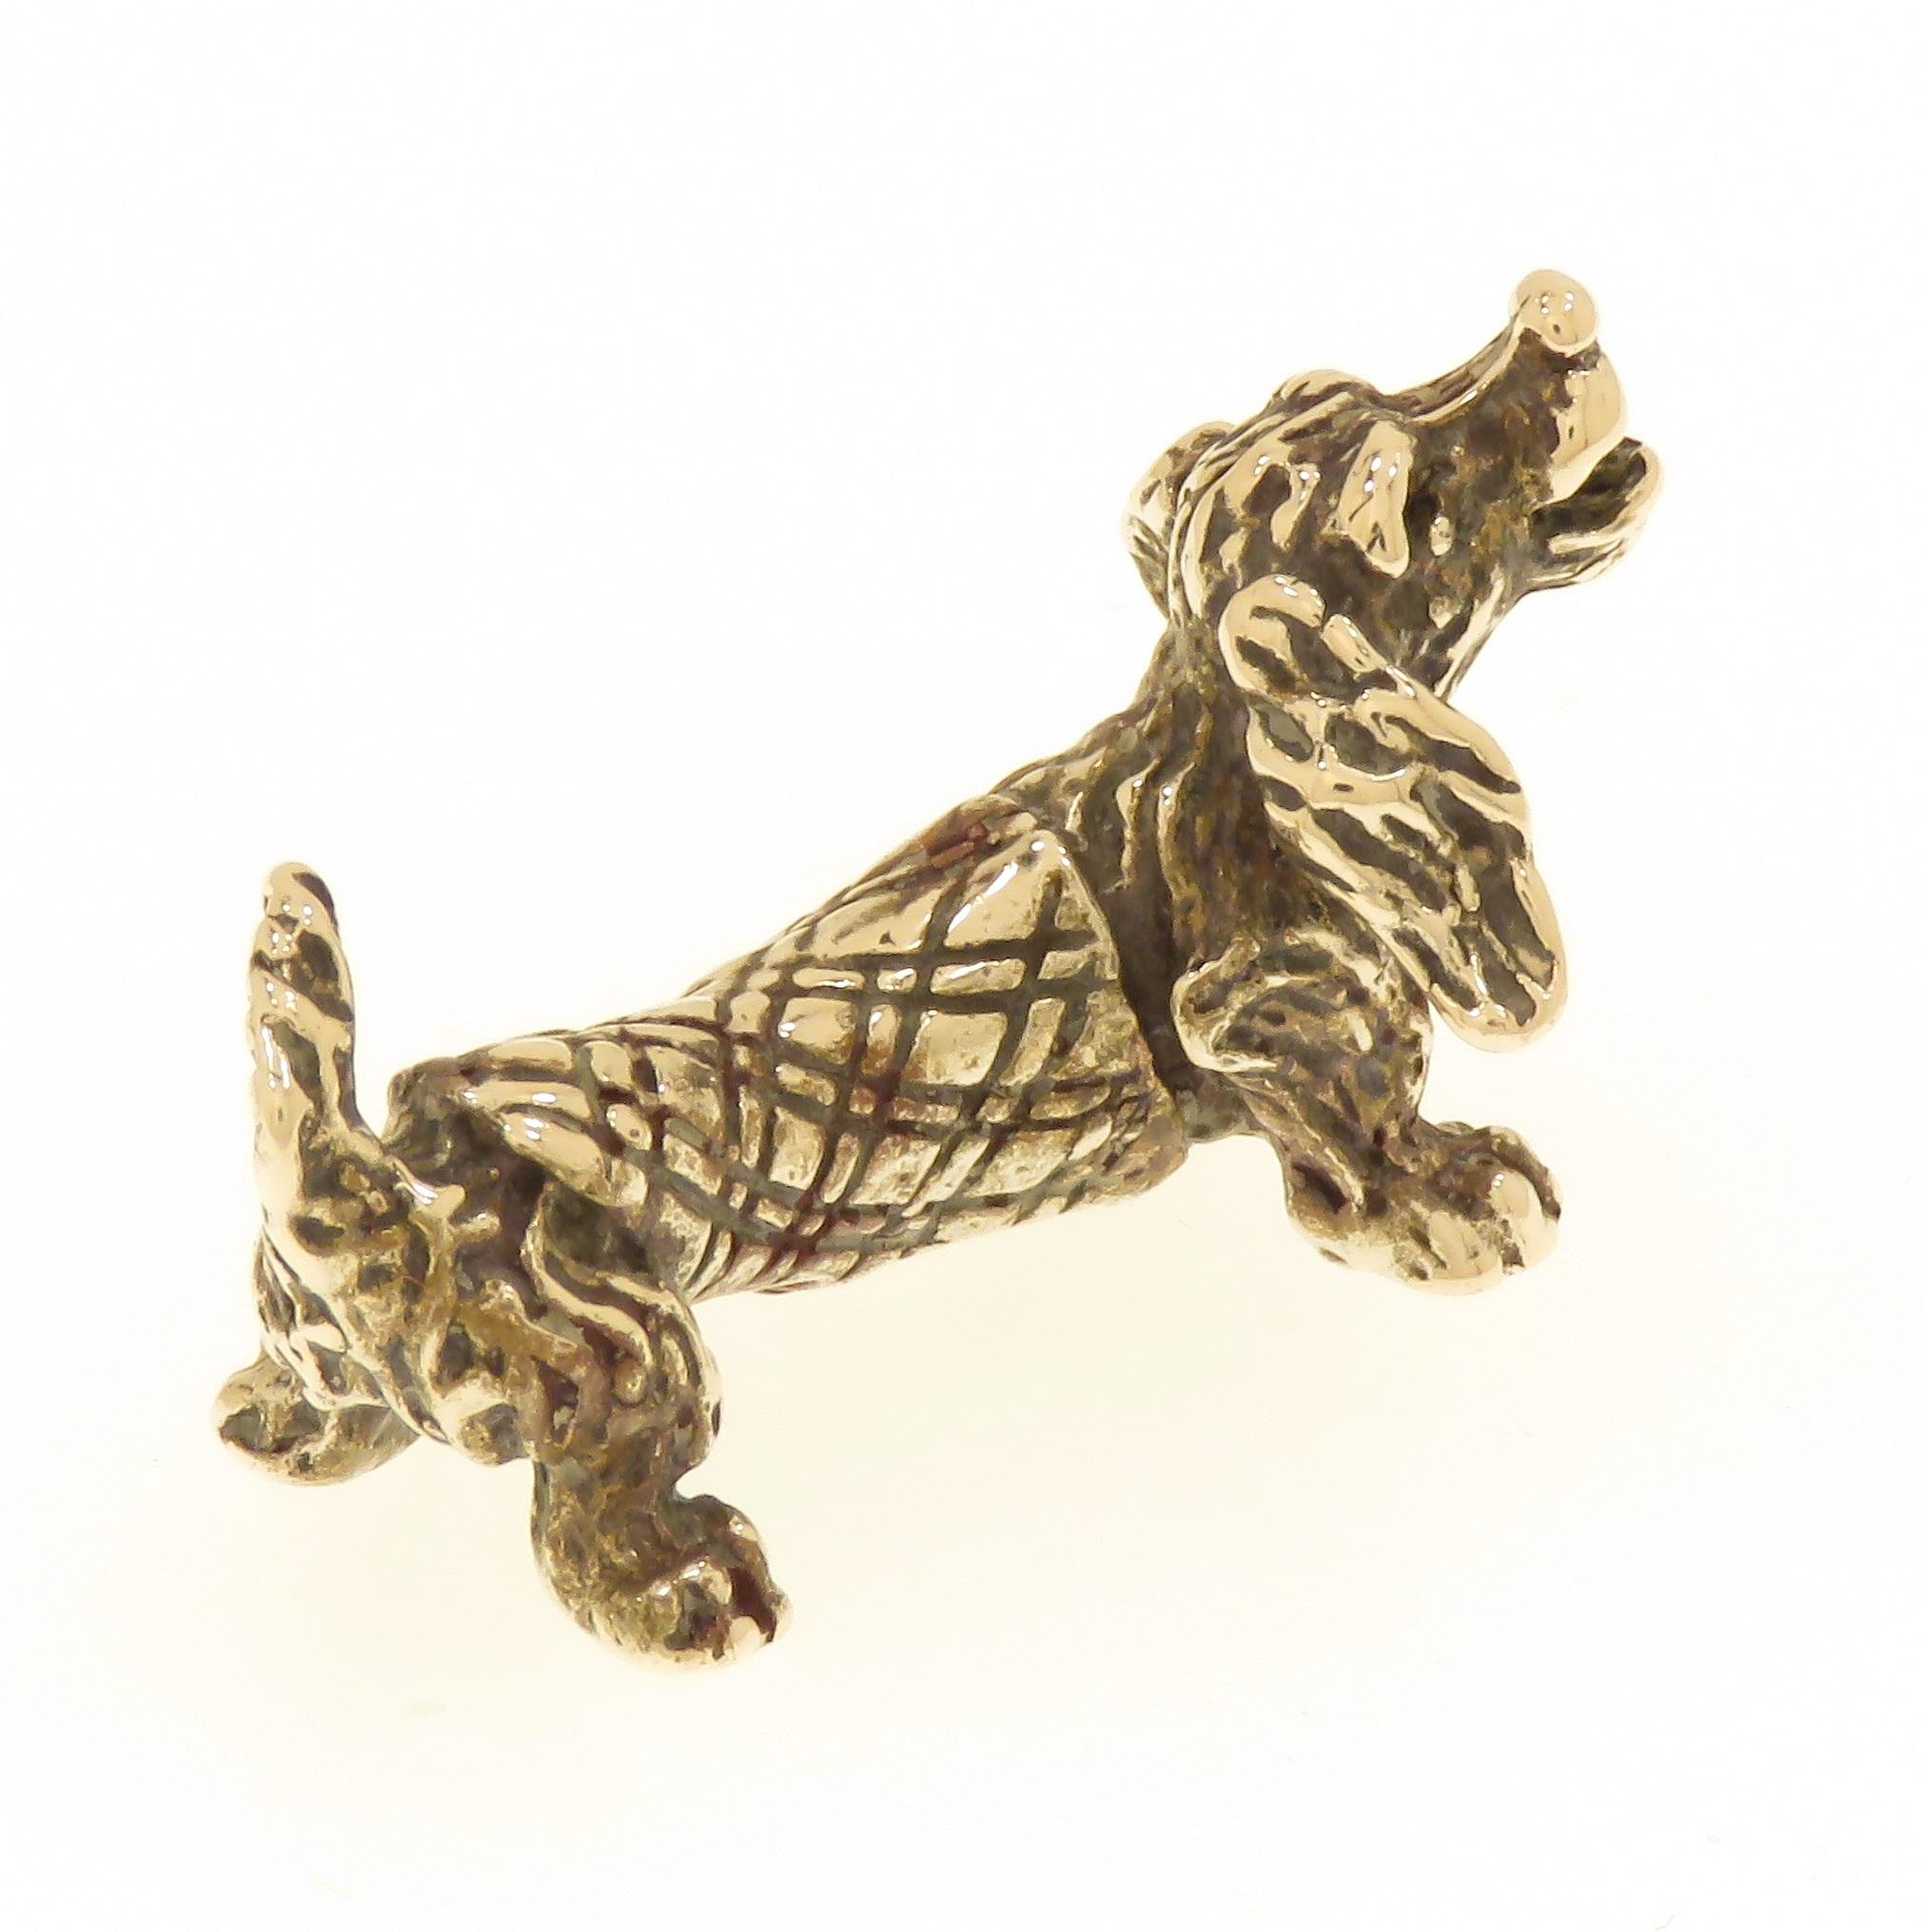 Retro Solid Silver Dachshund Figurine Vintage 1970s Made in Italy For Sale